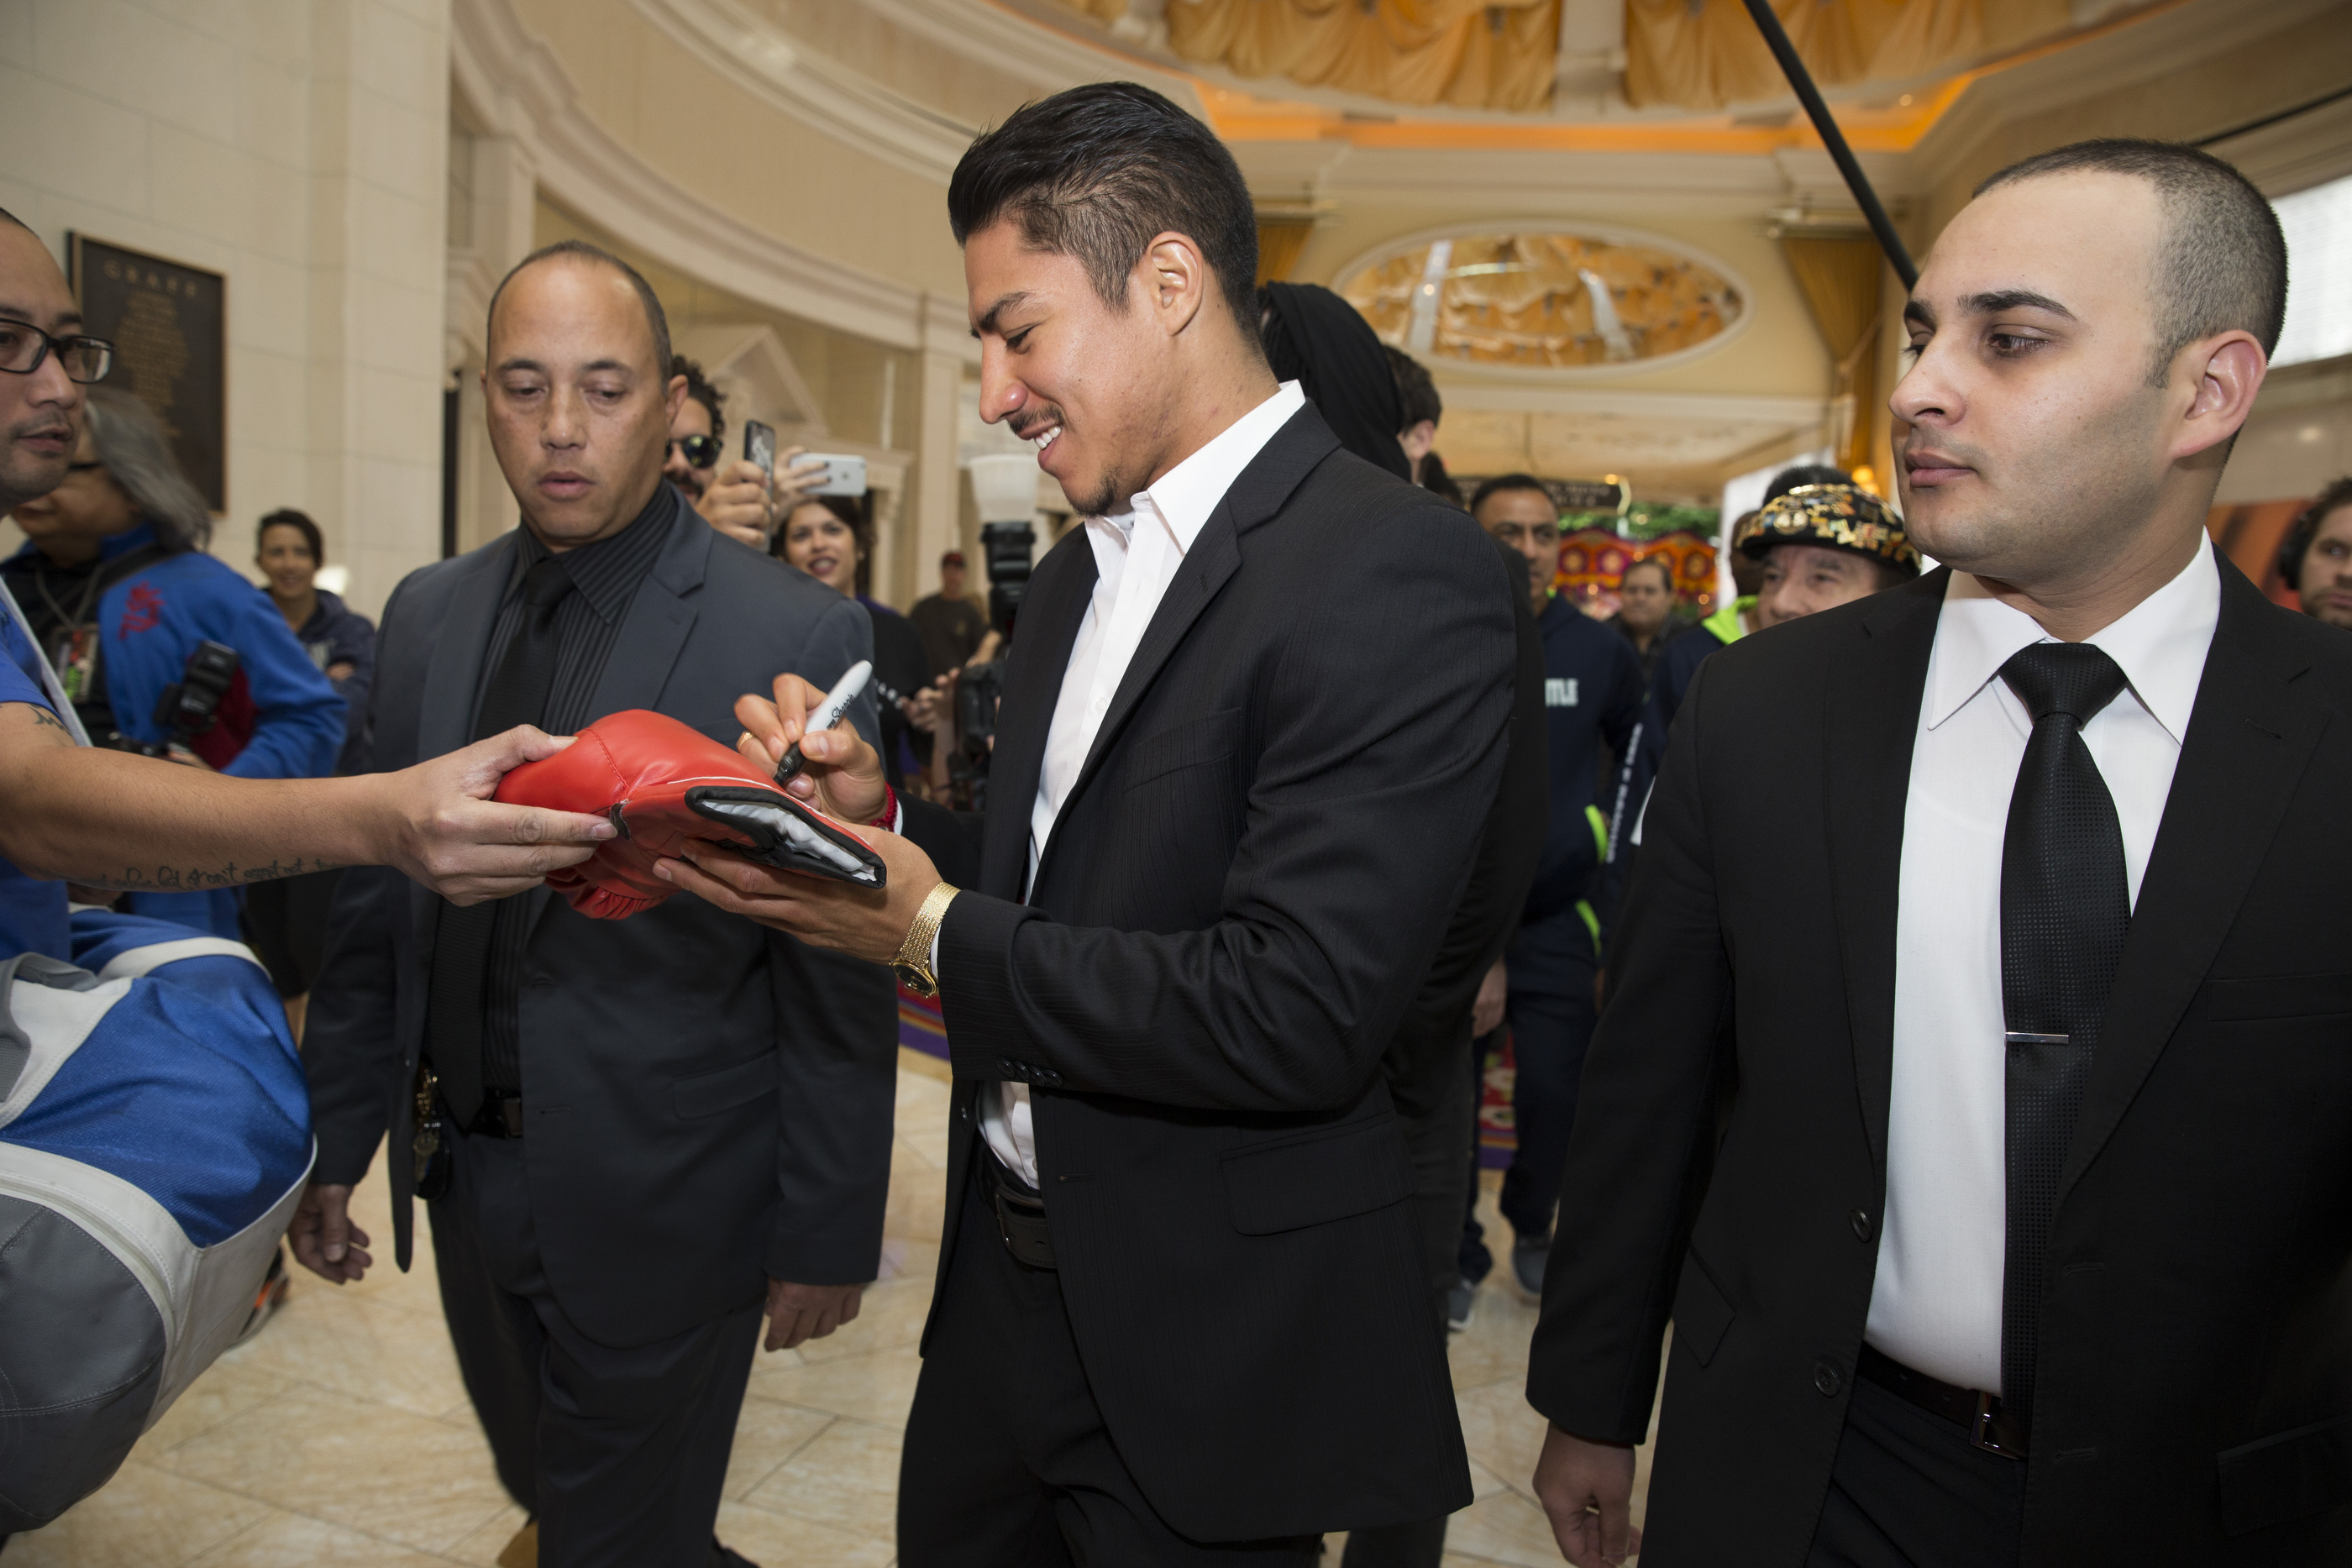 Boxer Jessie Vargas signs an autograph as he makes his "Grand Arrival" to the Wynn hotel-casino on Tuesday, Nov. 1, 2016, in Las Vegas. Vargas is scheduled to fight Manny Pacquiao  on Saturday night at the Thomas & Mack Center. (Erik Verduzco/Las Vegas Review-Journal via AP)